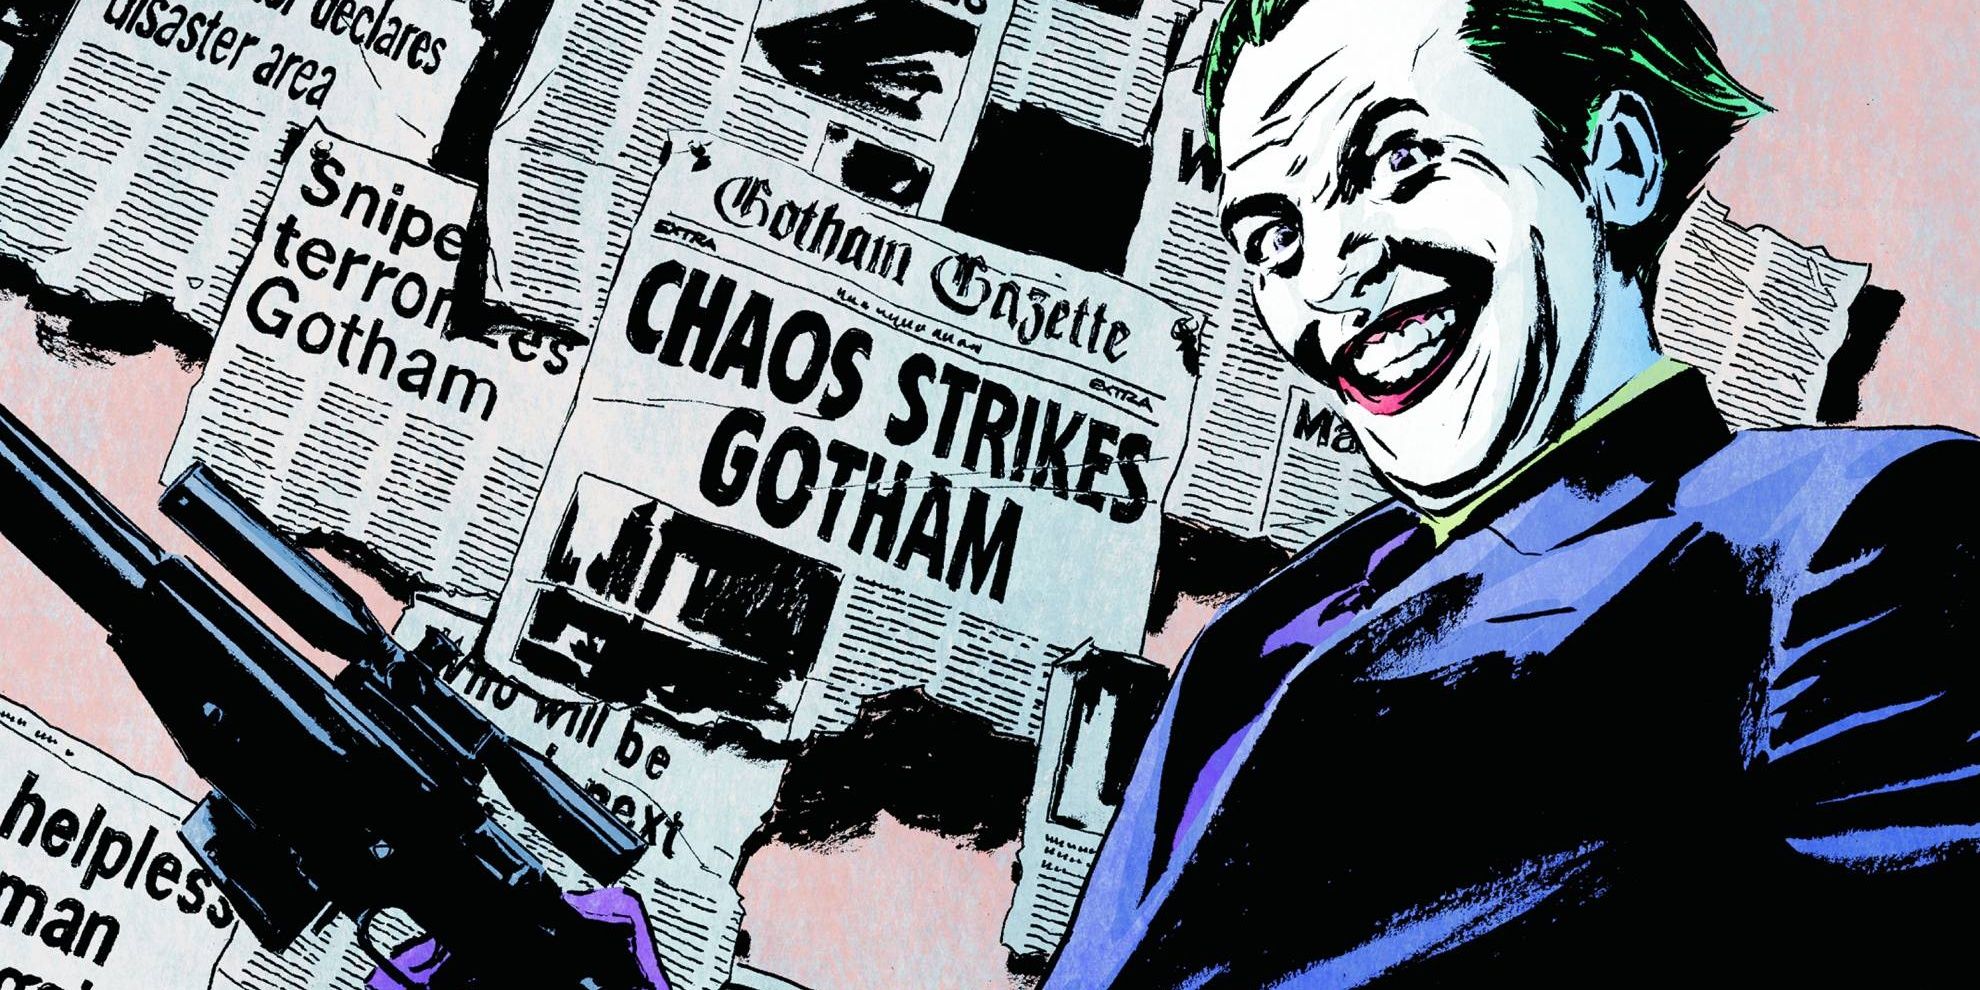 Gotham Central Book 2 Cropped